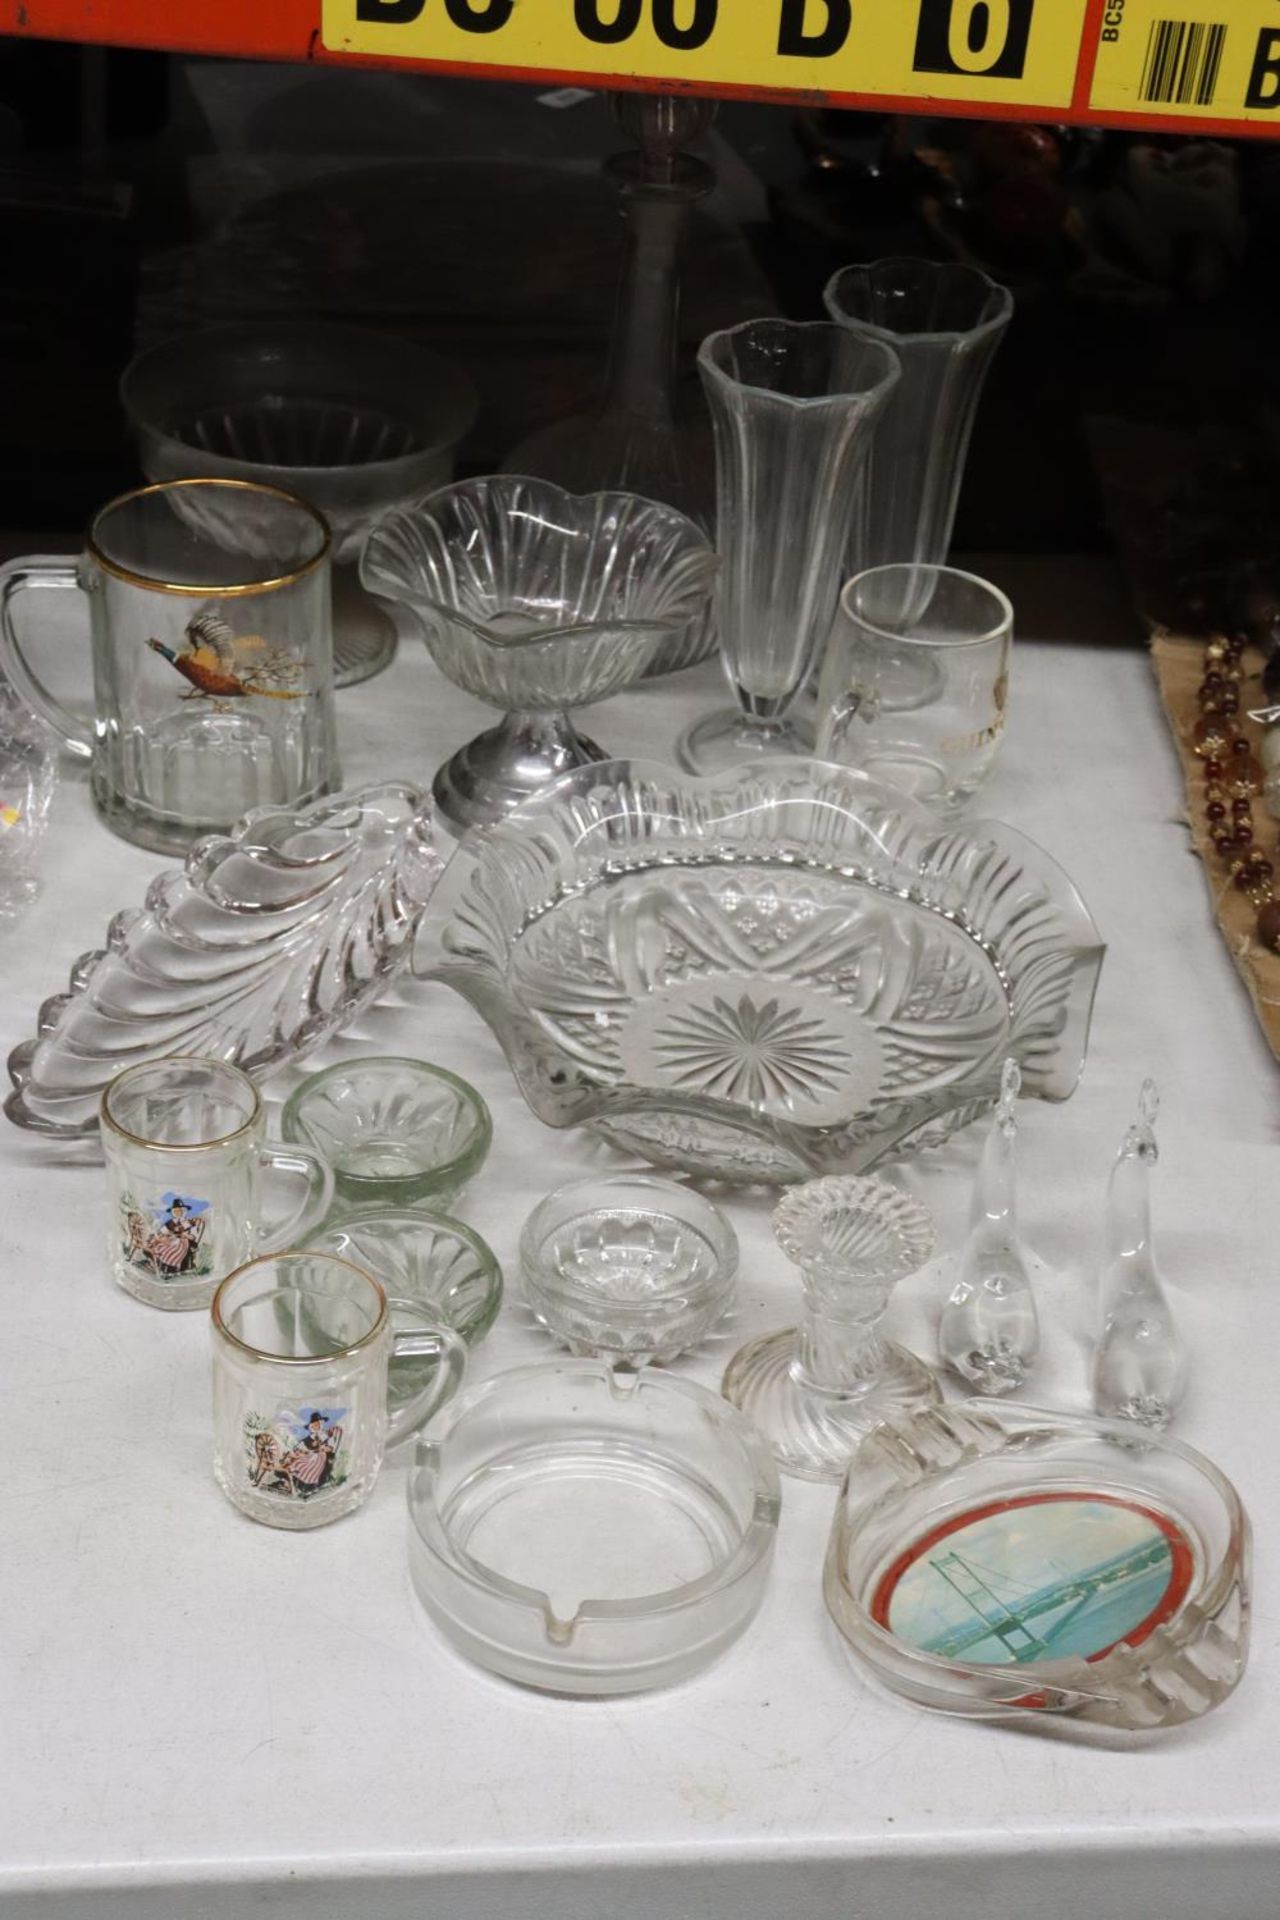 A QUANTITY OF VINTAGE GLASSWARE TO INCLUDE VASES, BOWLS, A TANKARD, A PAIR OF DOLPHINS, TEALIGHT